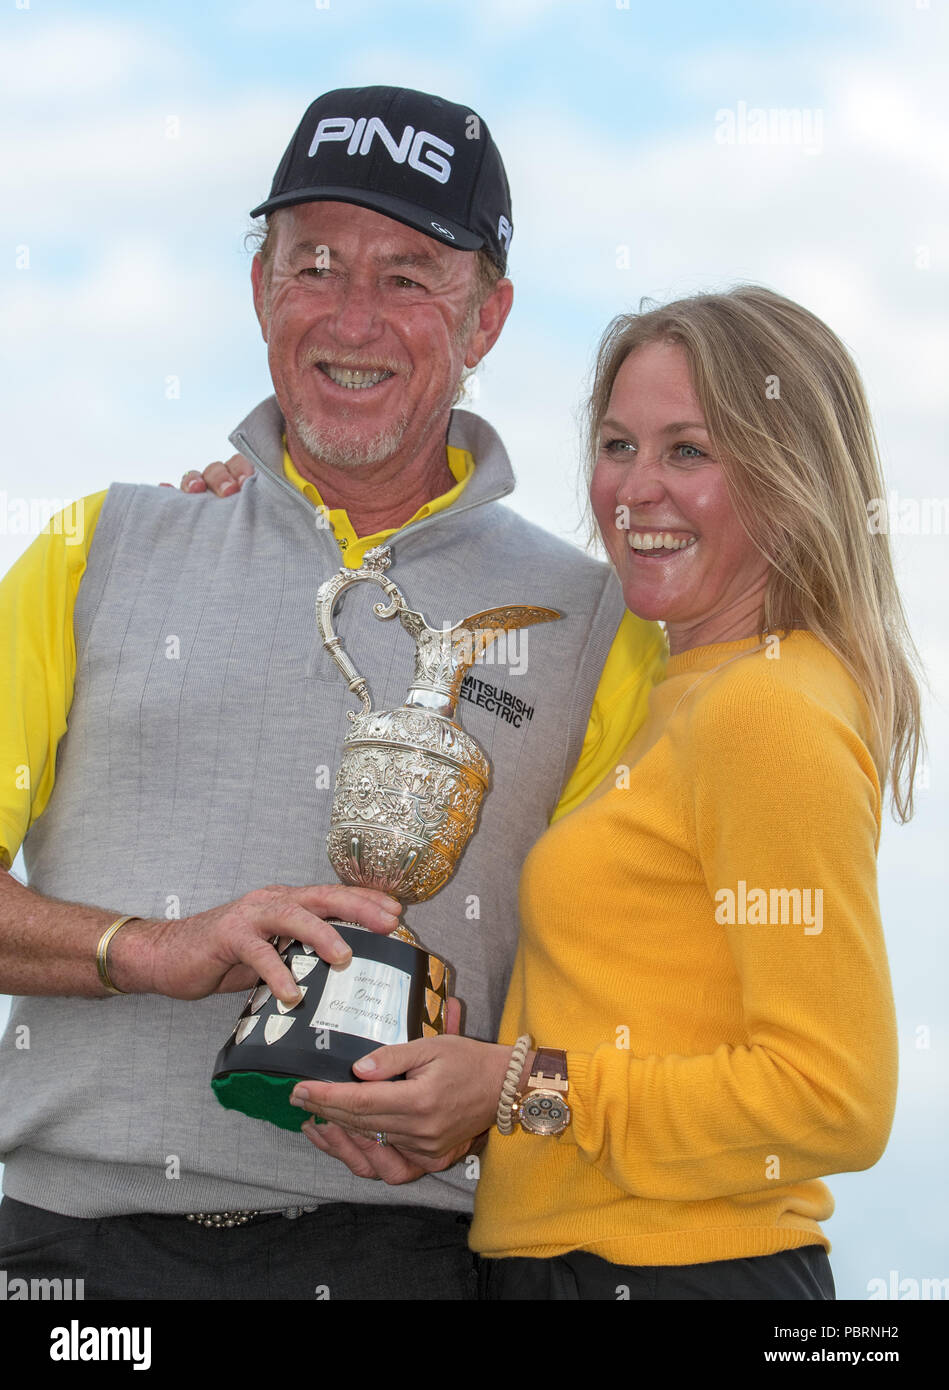 Spain S Miguel Angel Jimenez Celebrates With The Trophy Alongside His Wife Susanna Styblo After Winning The Senior Open At Old Course St Andrews Stock Photo Alamy